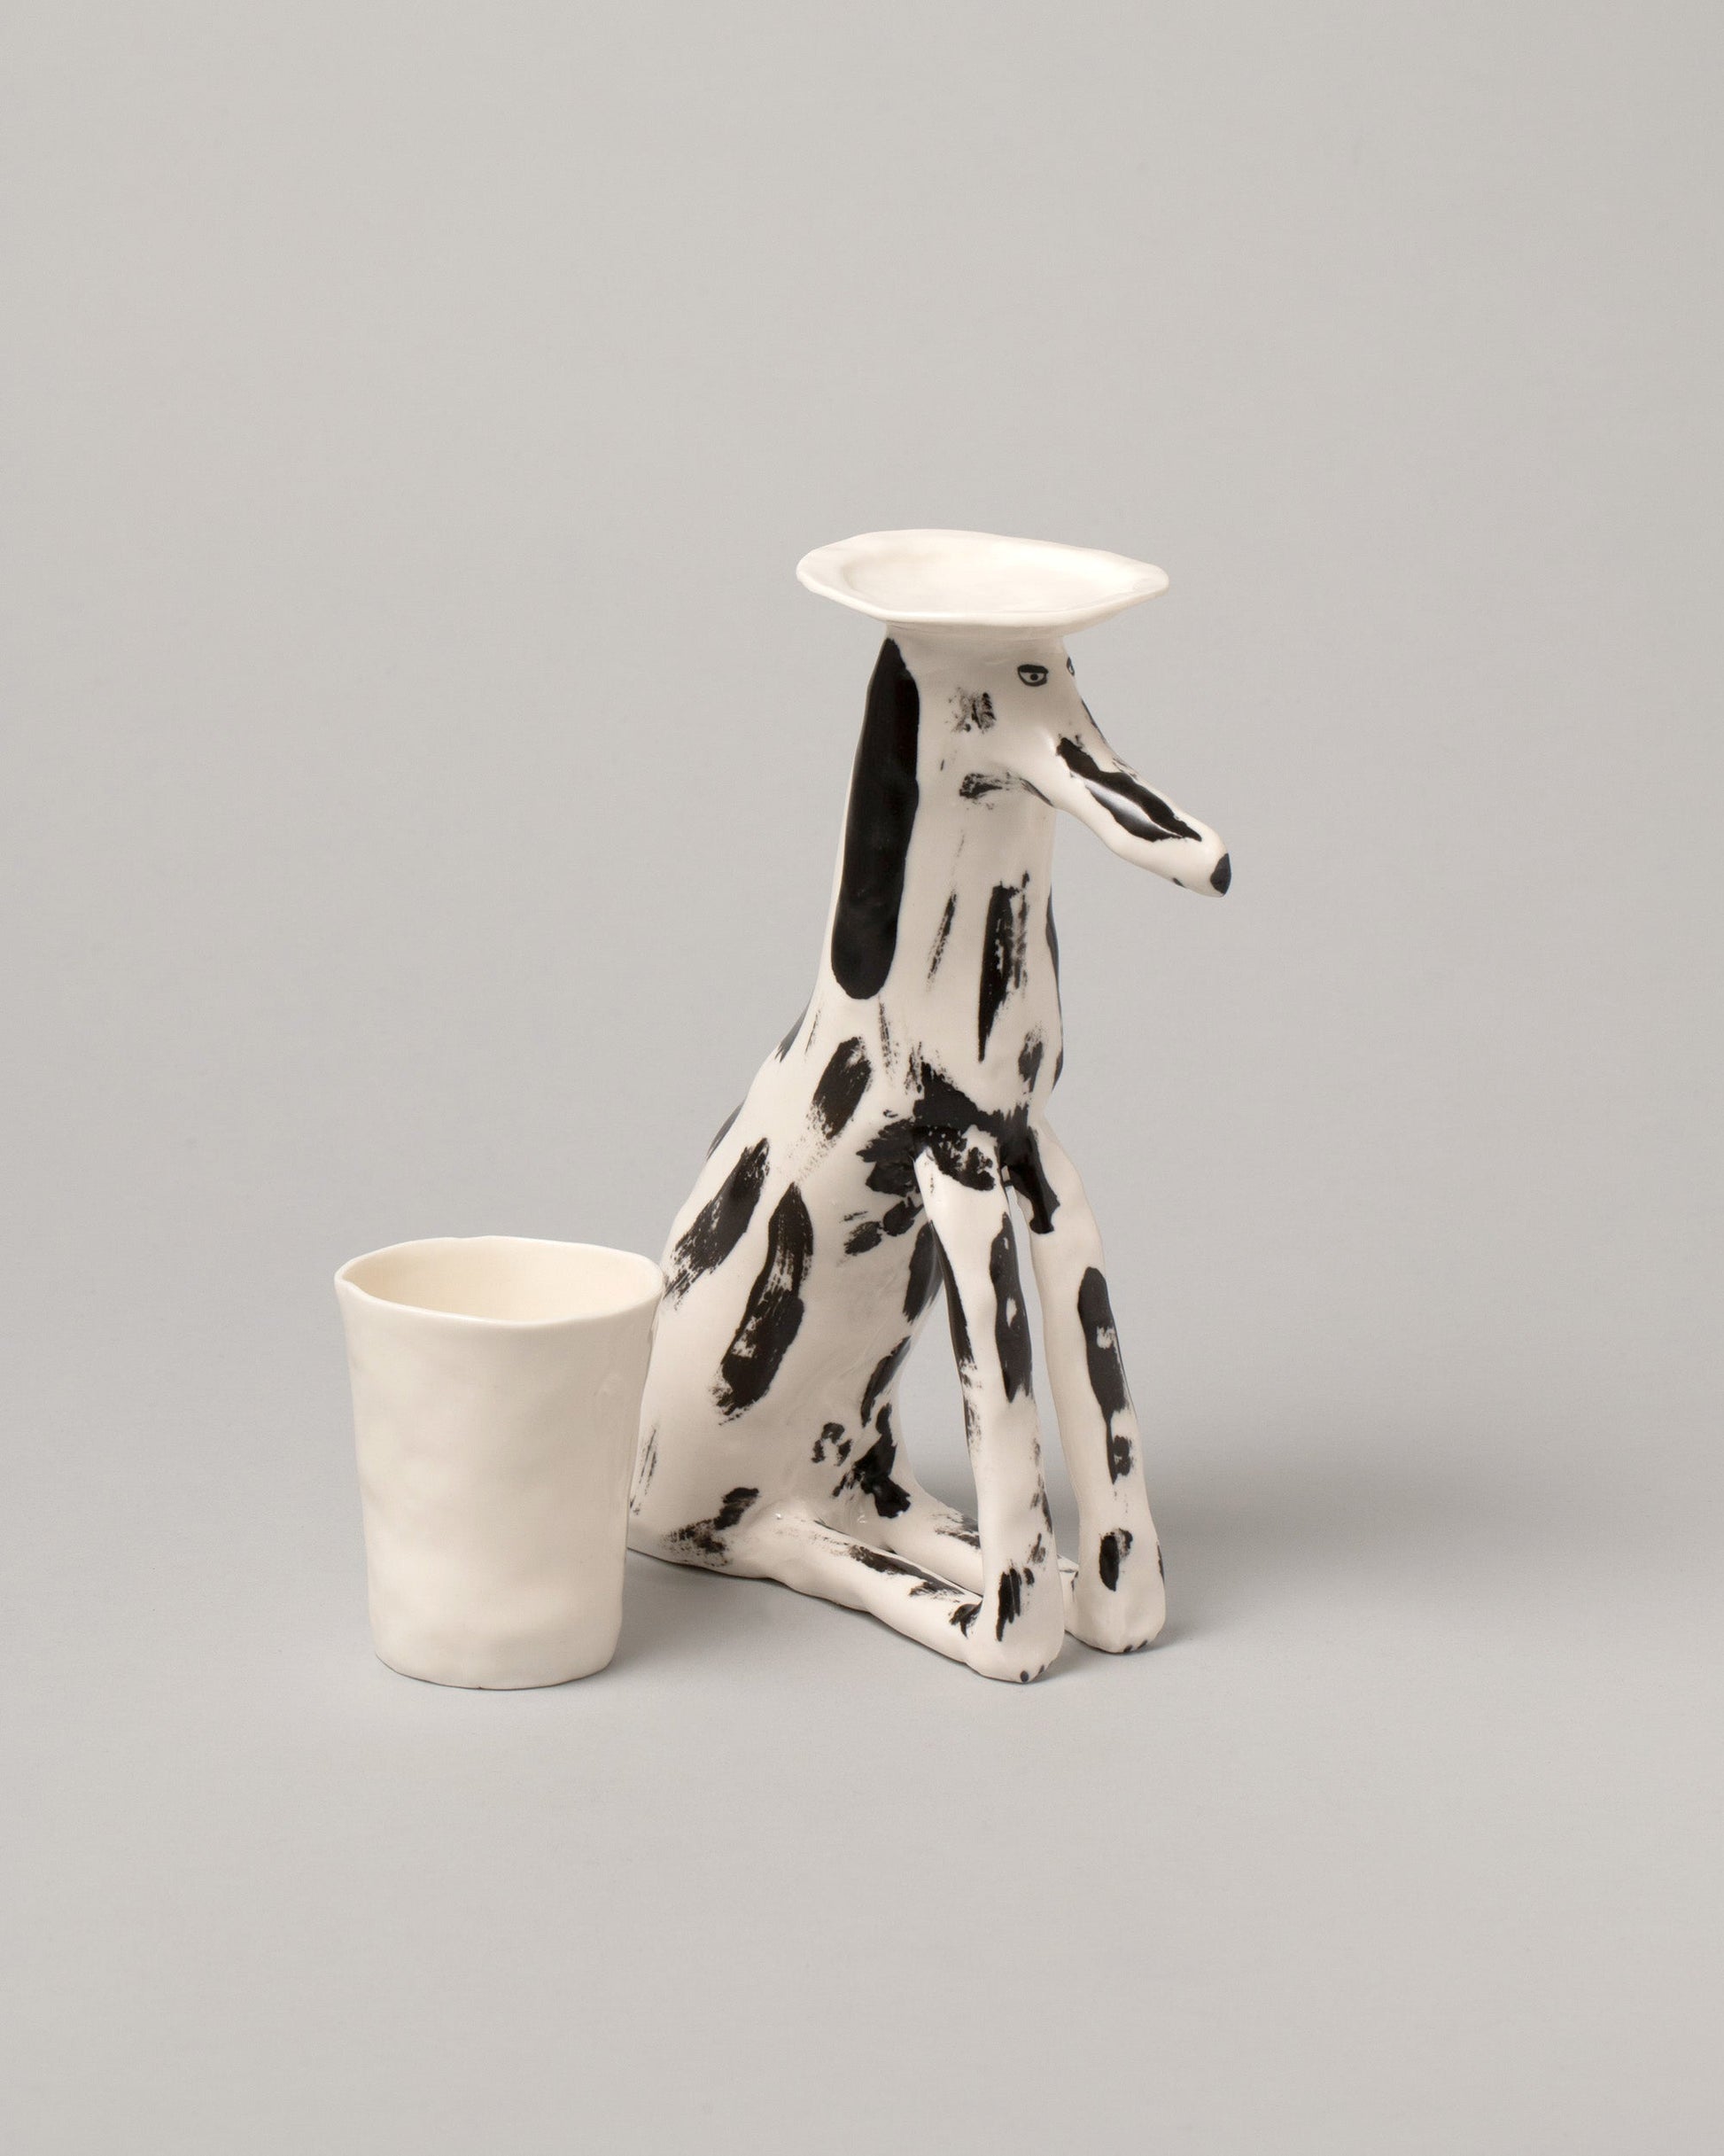 Detail view of the Eleonor Boström Plant Pot Dogs on light color background.